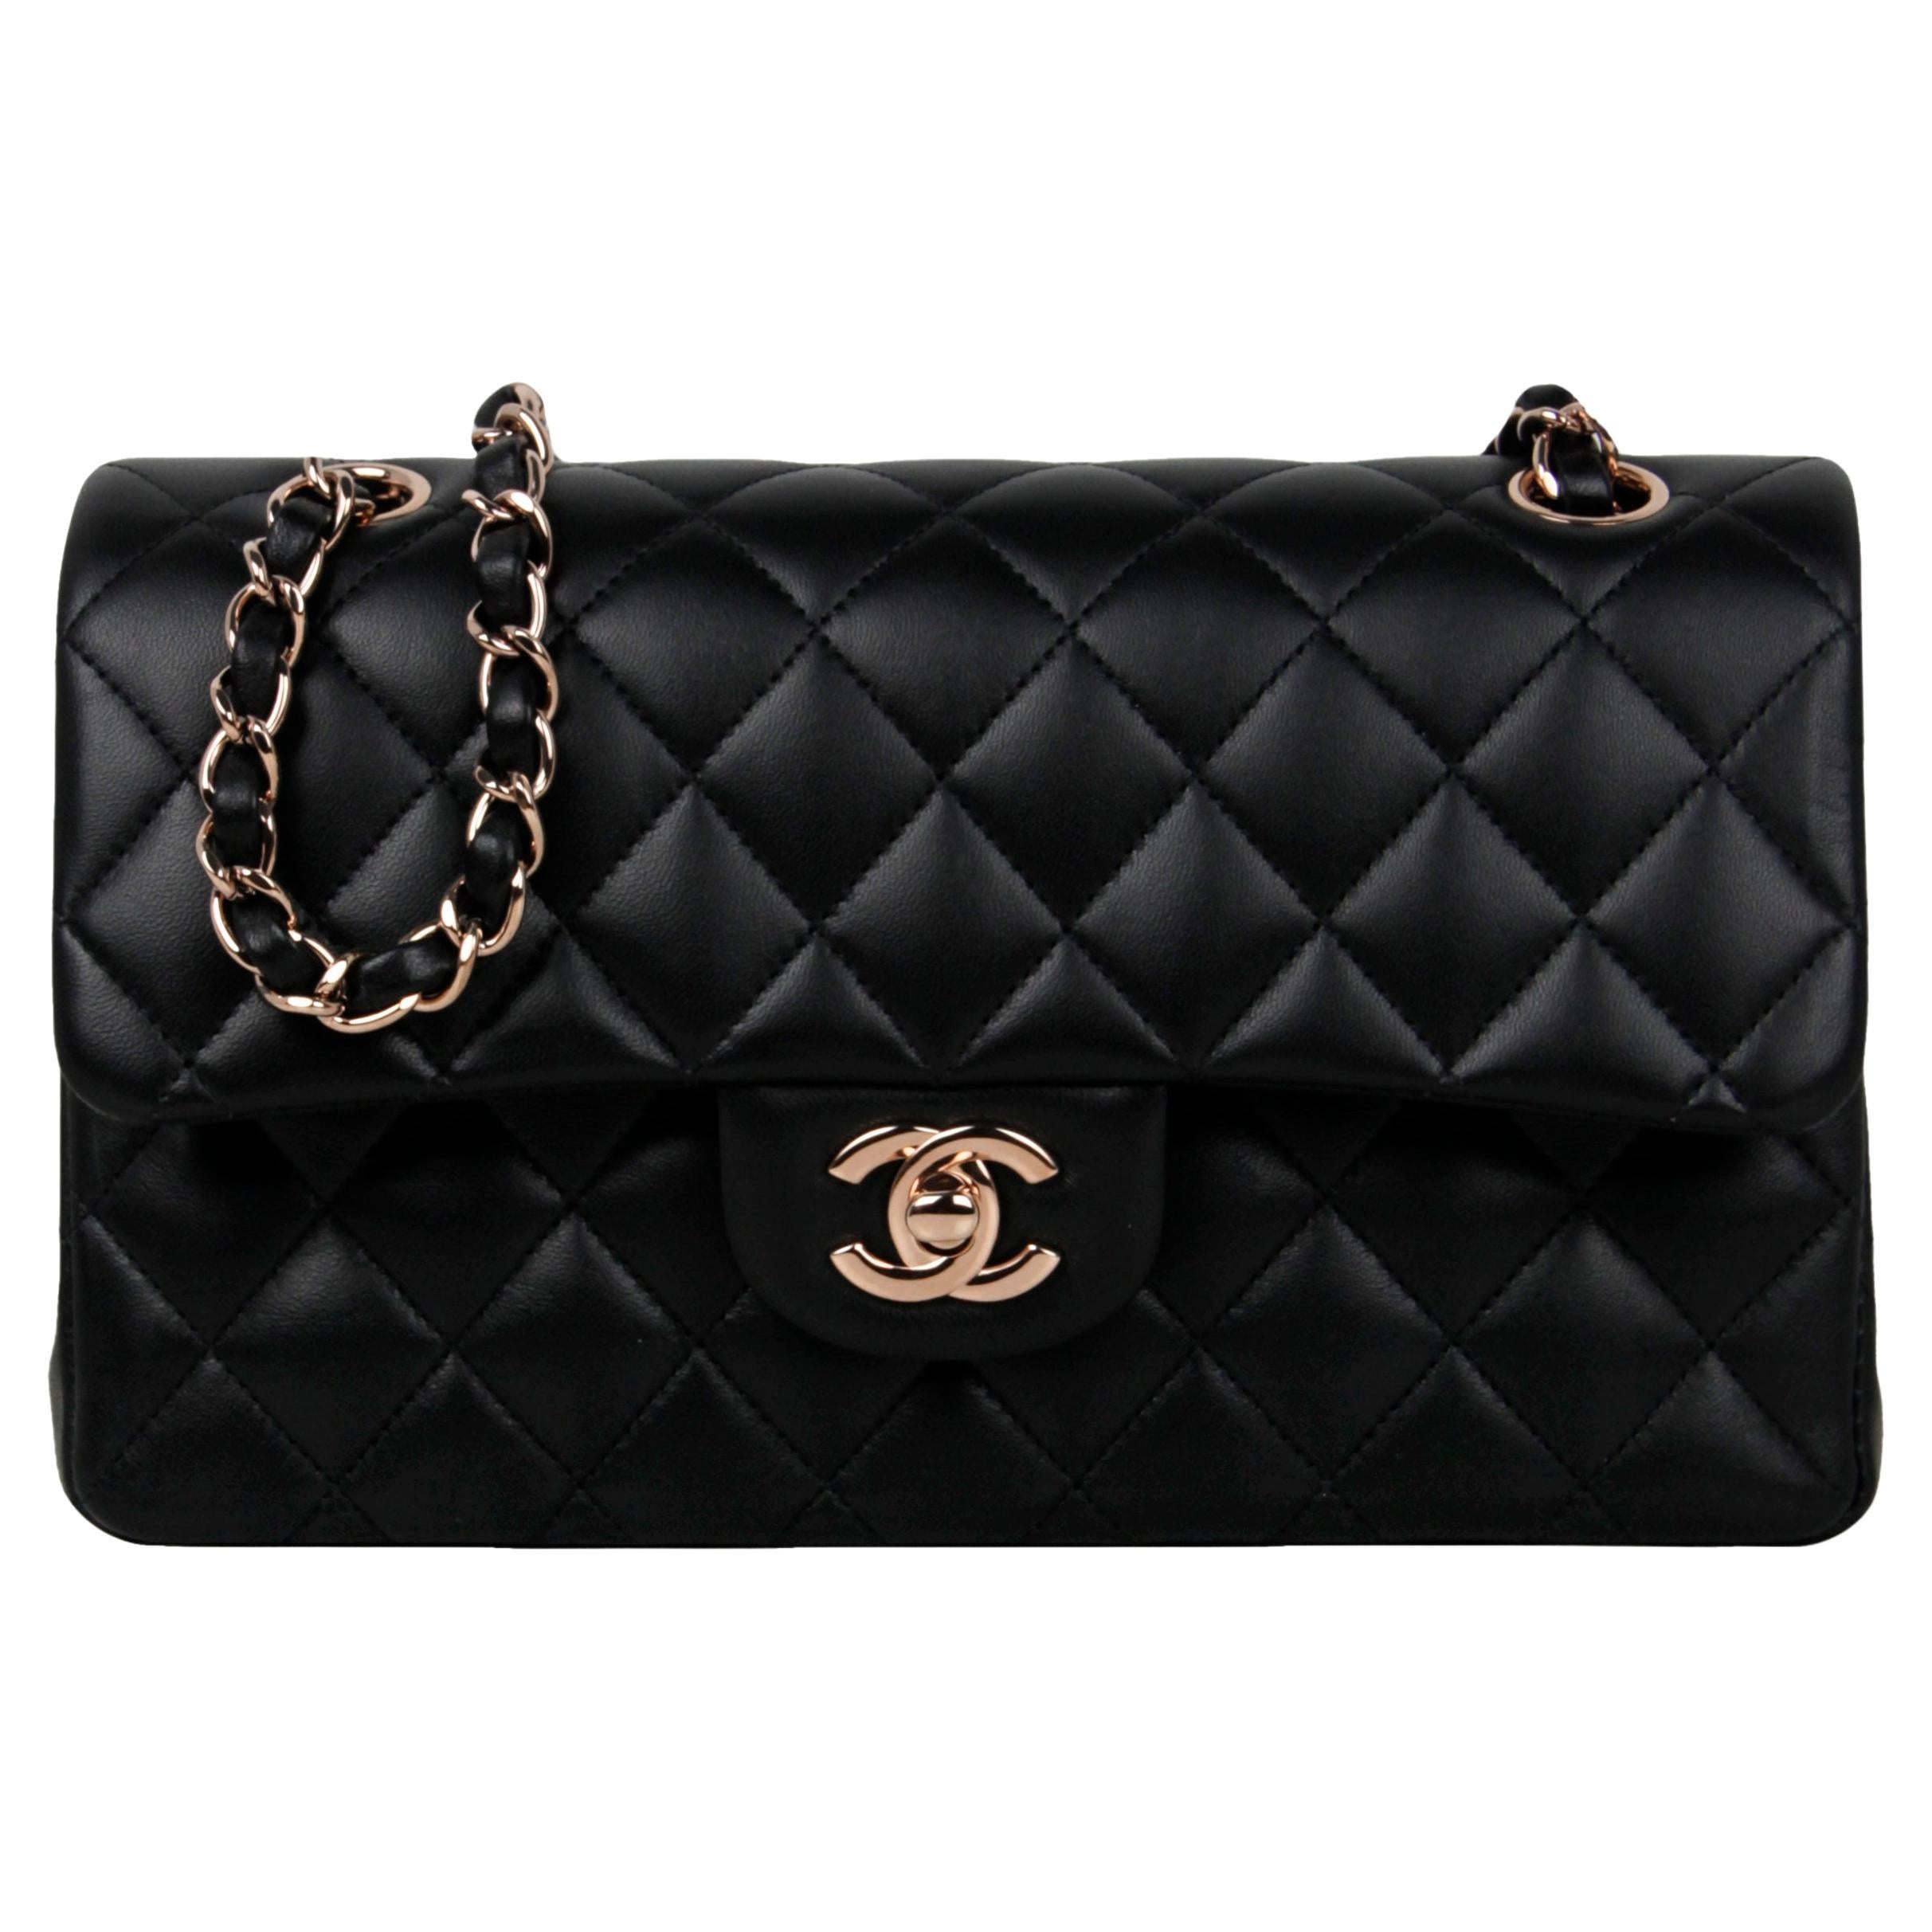 Chanel Black Lambskin Leather Double Flap Small Classic Bag w/ Rose Gold HW For Sale